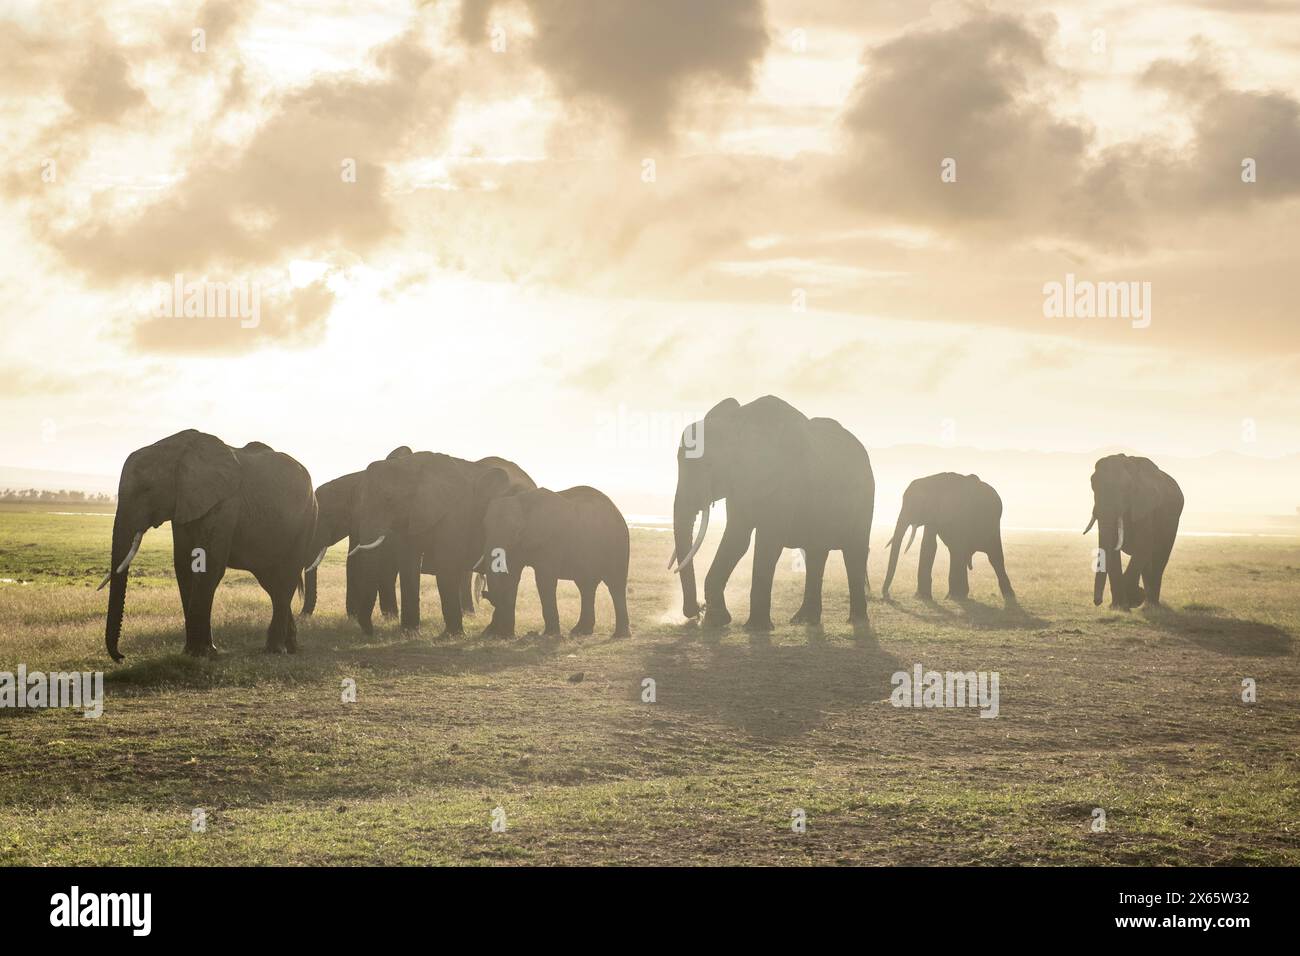 A herd of elephants walk a dusty landscape, silhouetted against Stock Photo